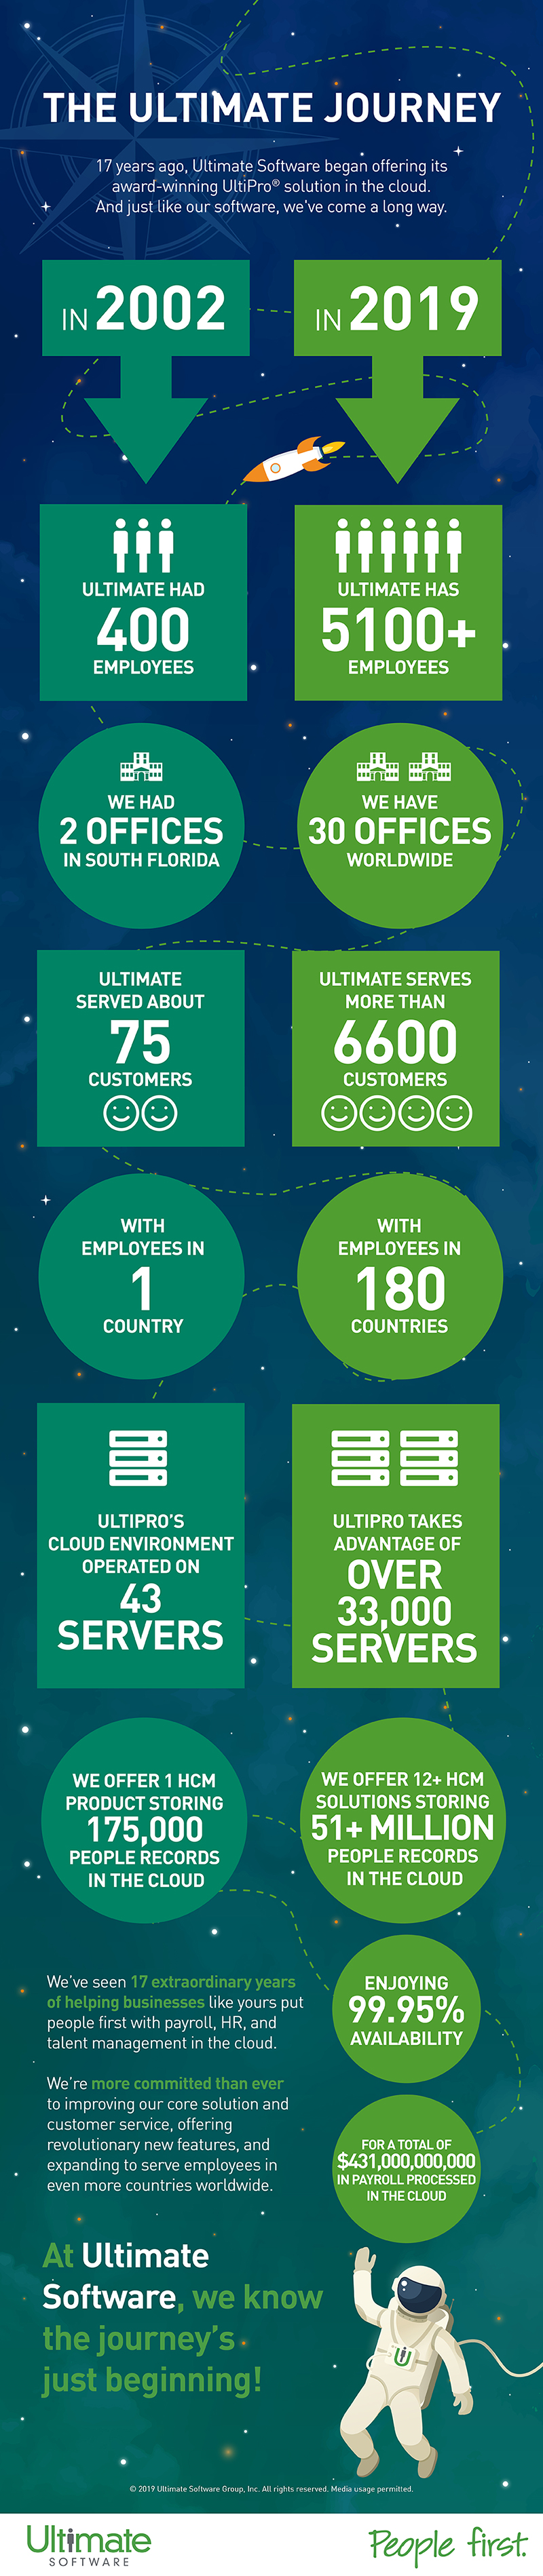 What kinds of services does UltiPro offer?